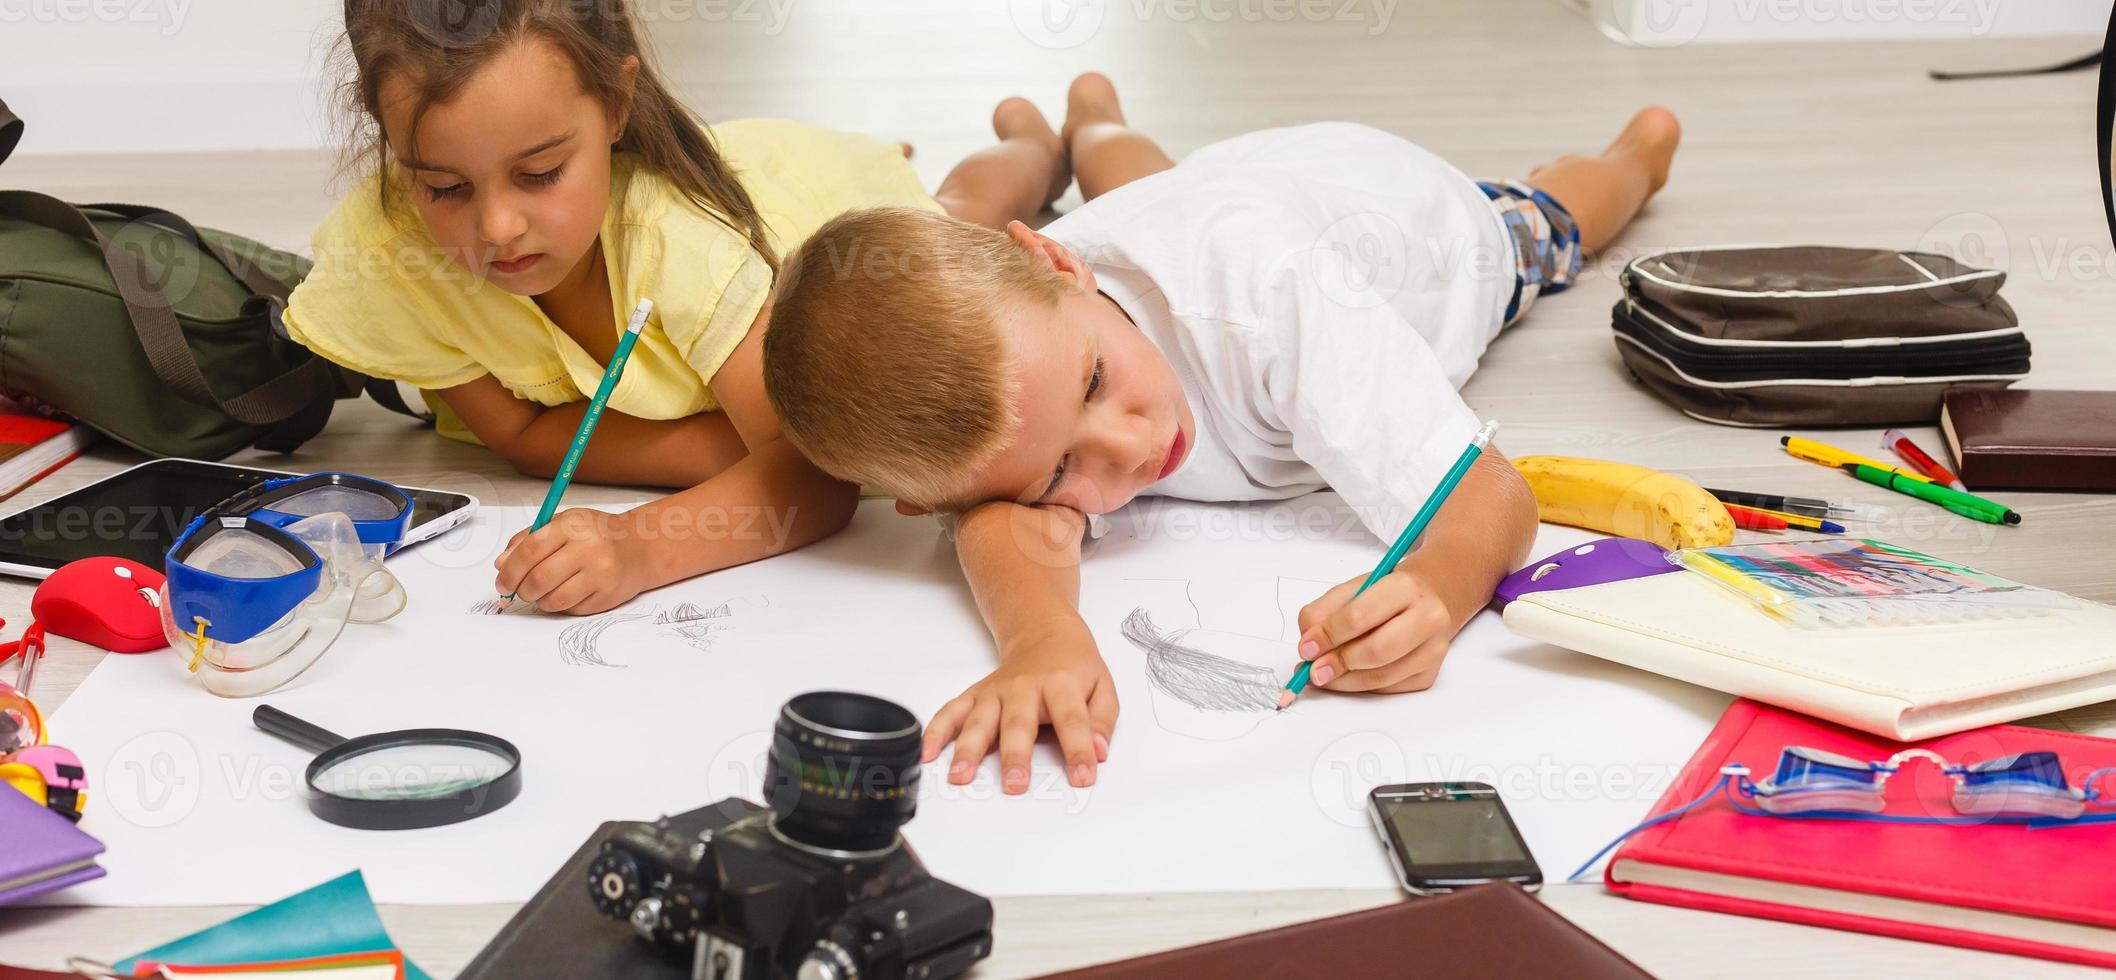 Cute children drawing lying on the floor with their parents in the background photo